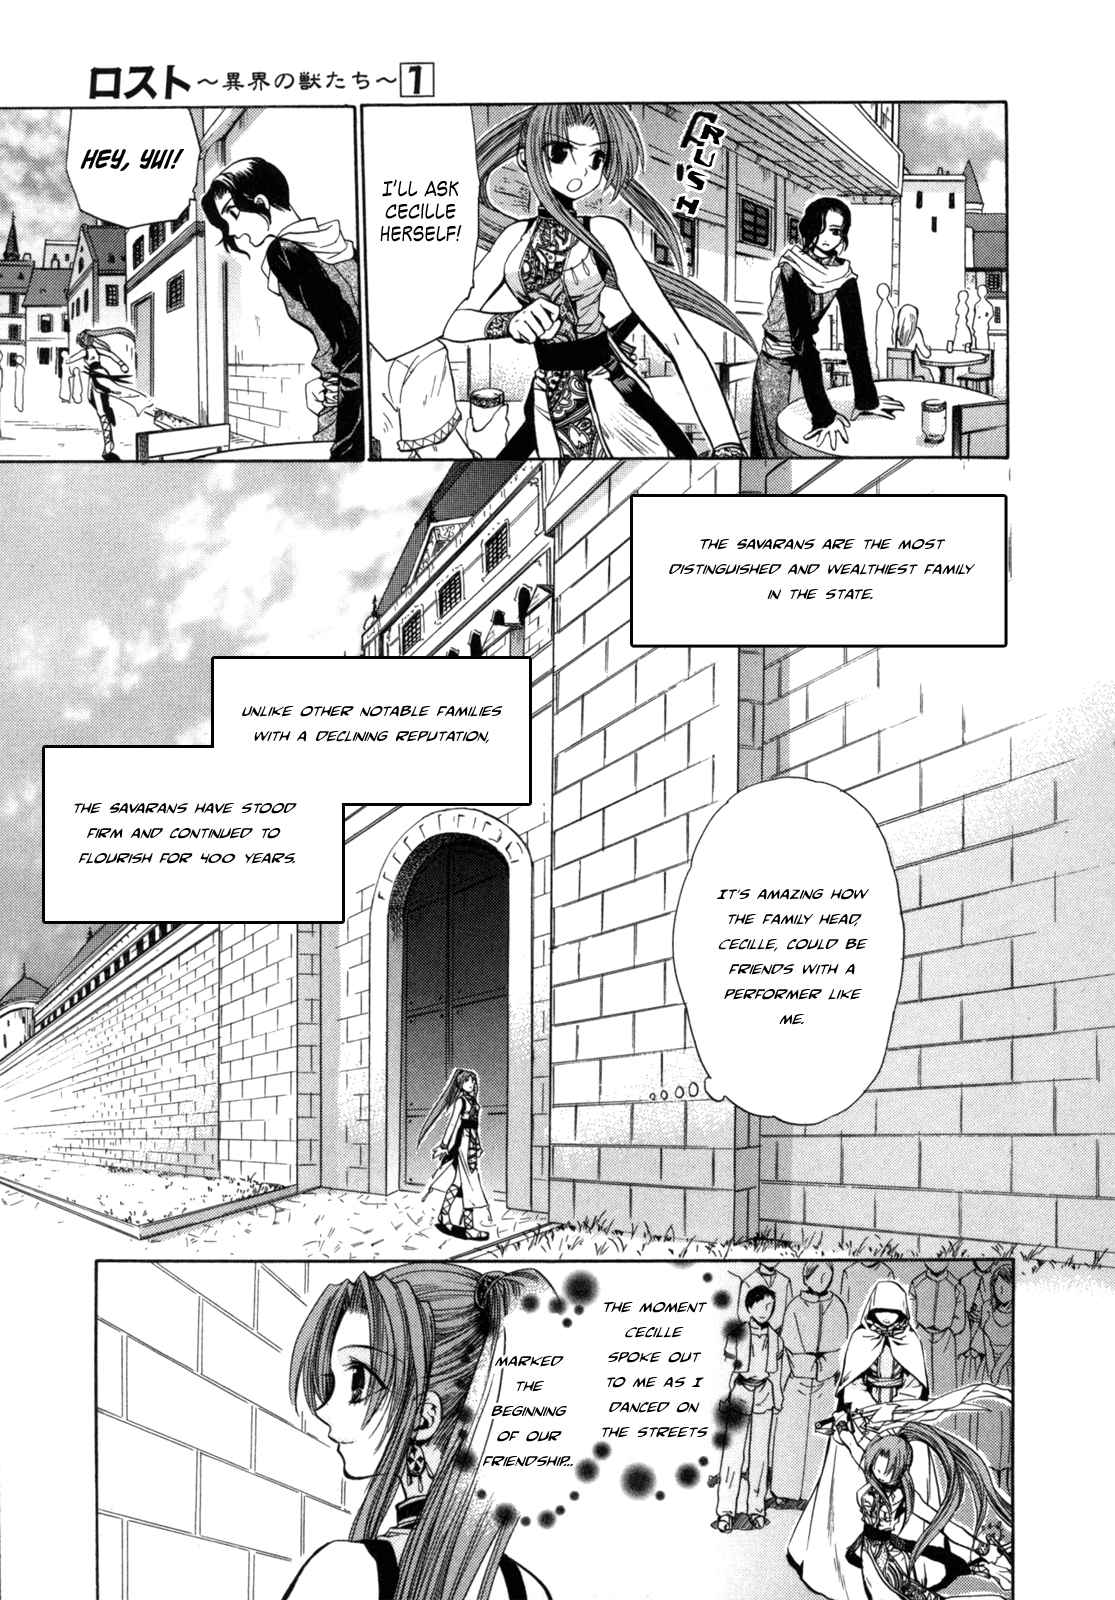 Lost Beasts of Another World Vol. 1 Ch. 1